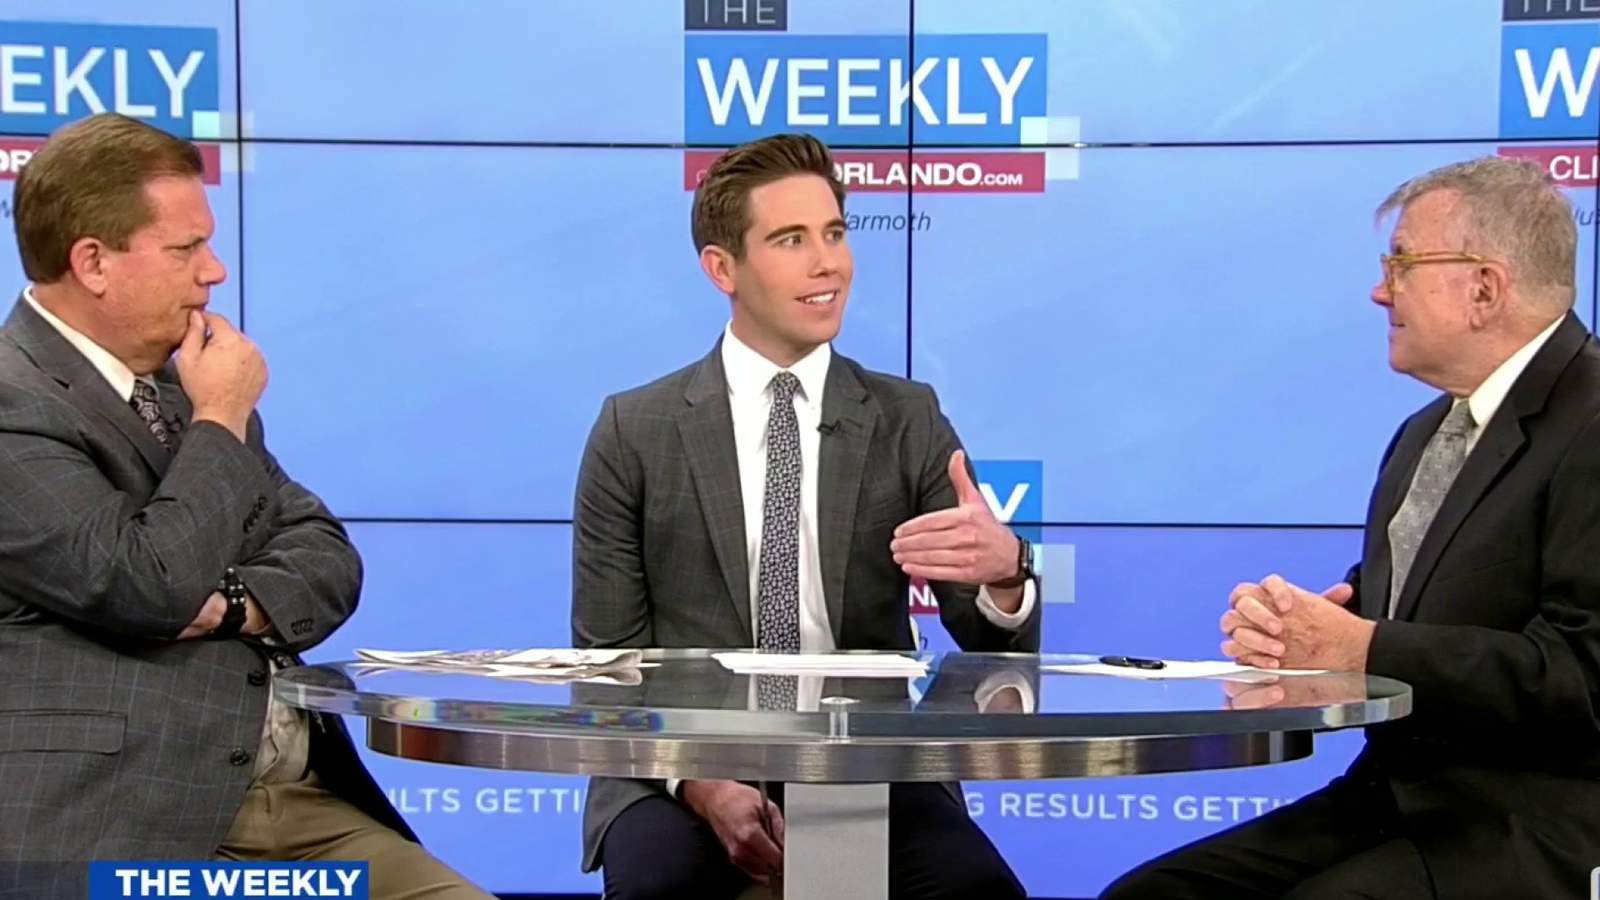 News 6 political analyst previews the Democratic presidential primaries on ‘The Weekly’